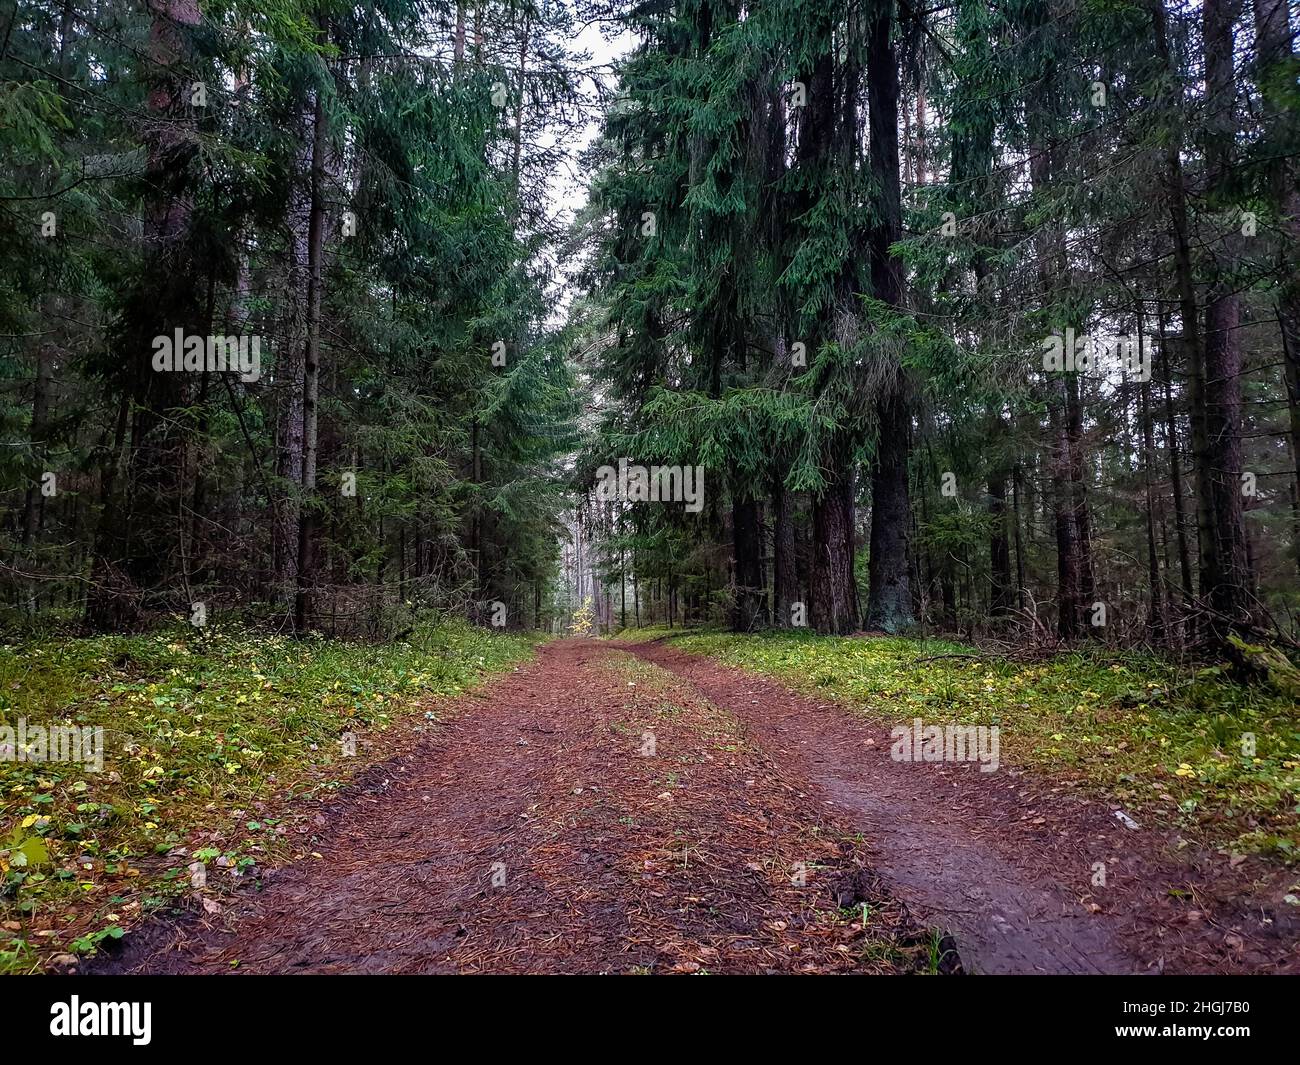 The road the forest. Paths in the deep forest. Stock Photo